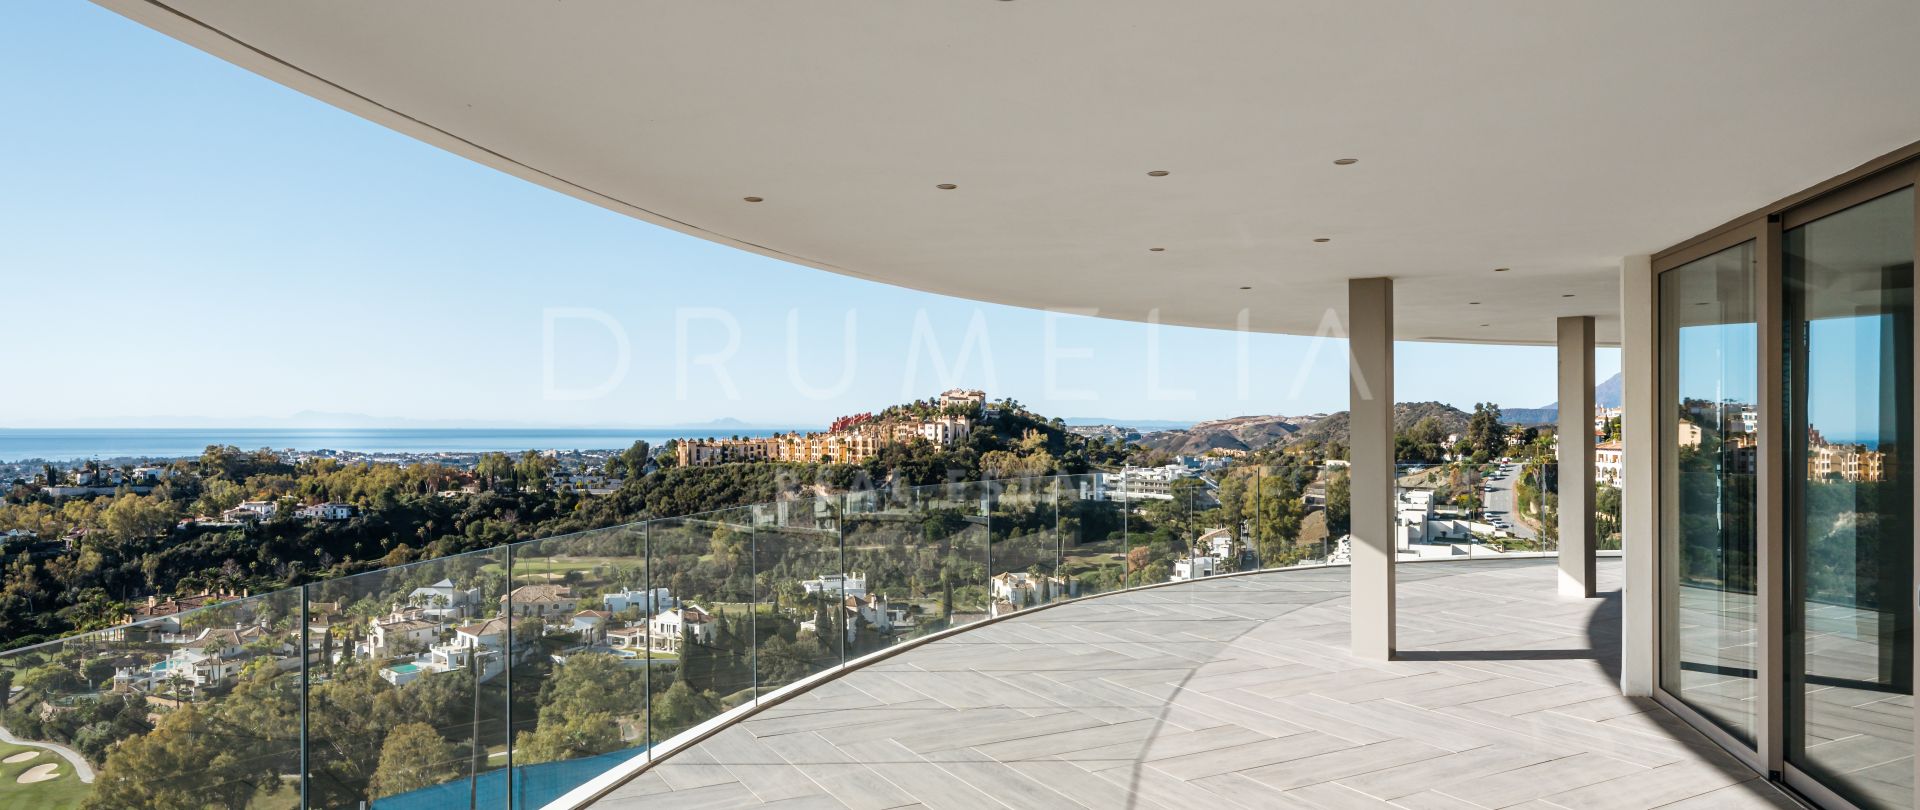 The View Soul -Brand-new spectacular modern luxury apartment with stunning panoramic sea view in Benahavís